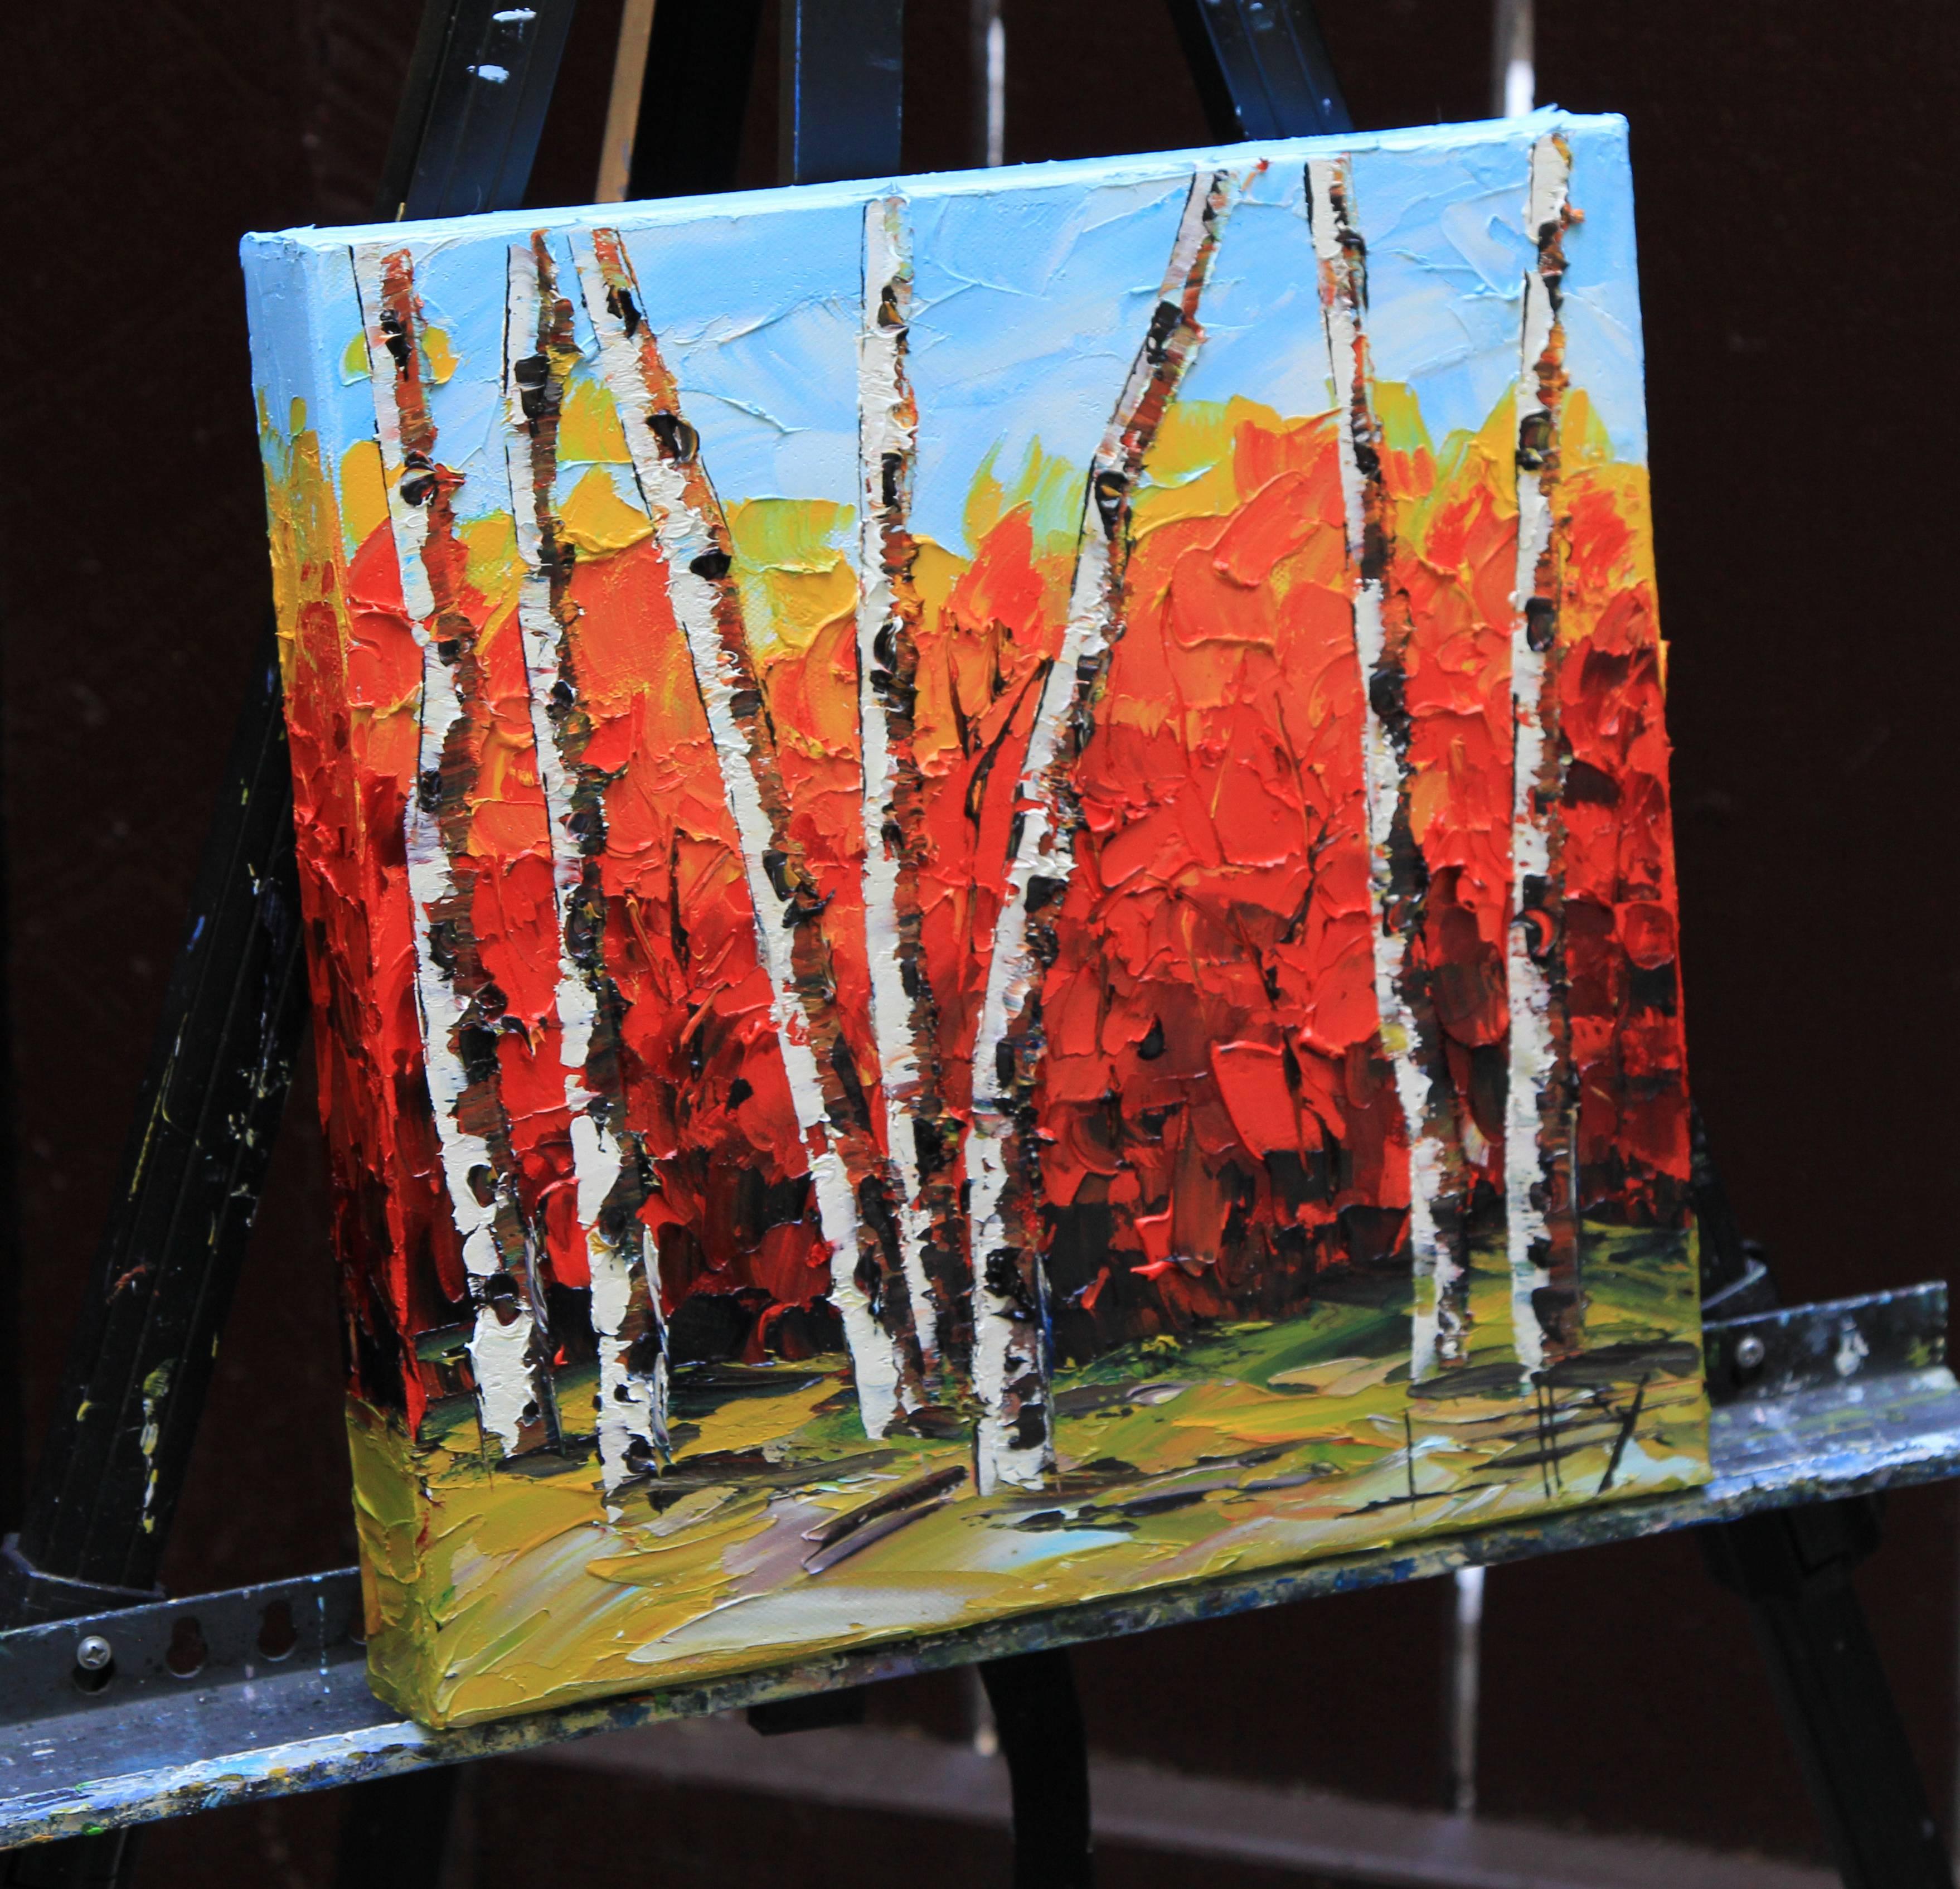 Eminence Lisa Elley Oil painting on stretched canvas
One-of-a-kind
Signed on front and back
2016
12 in. h x 12 in. w x .75 in. d
0 lbs. 8 oz. Artist Comments 
My favorite subject of birch trees is captured here with my favorite tools, palette